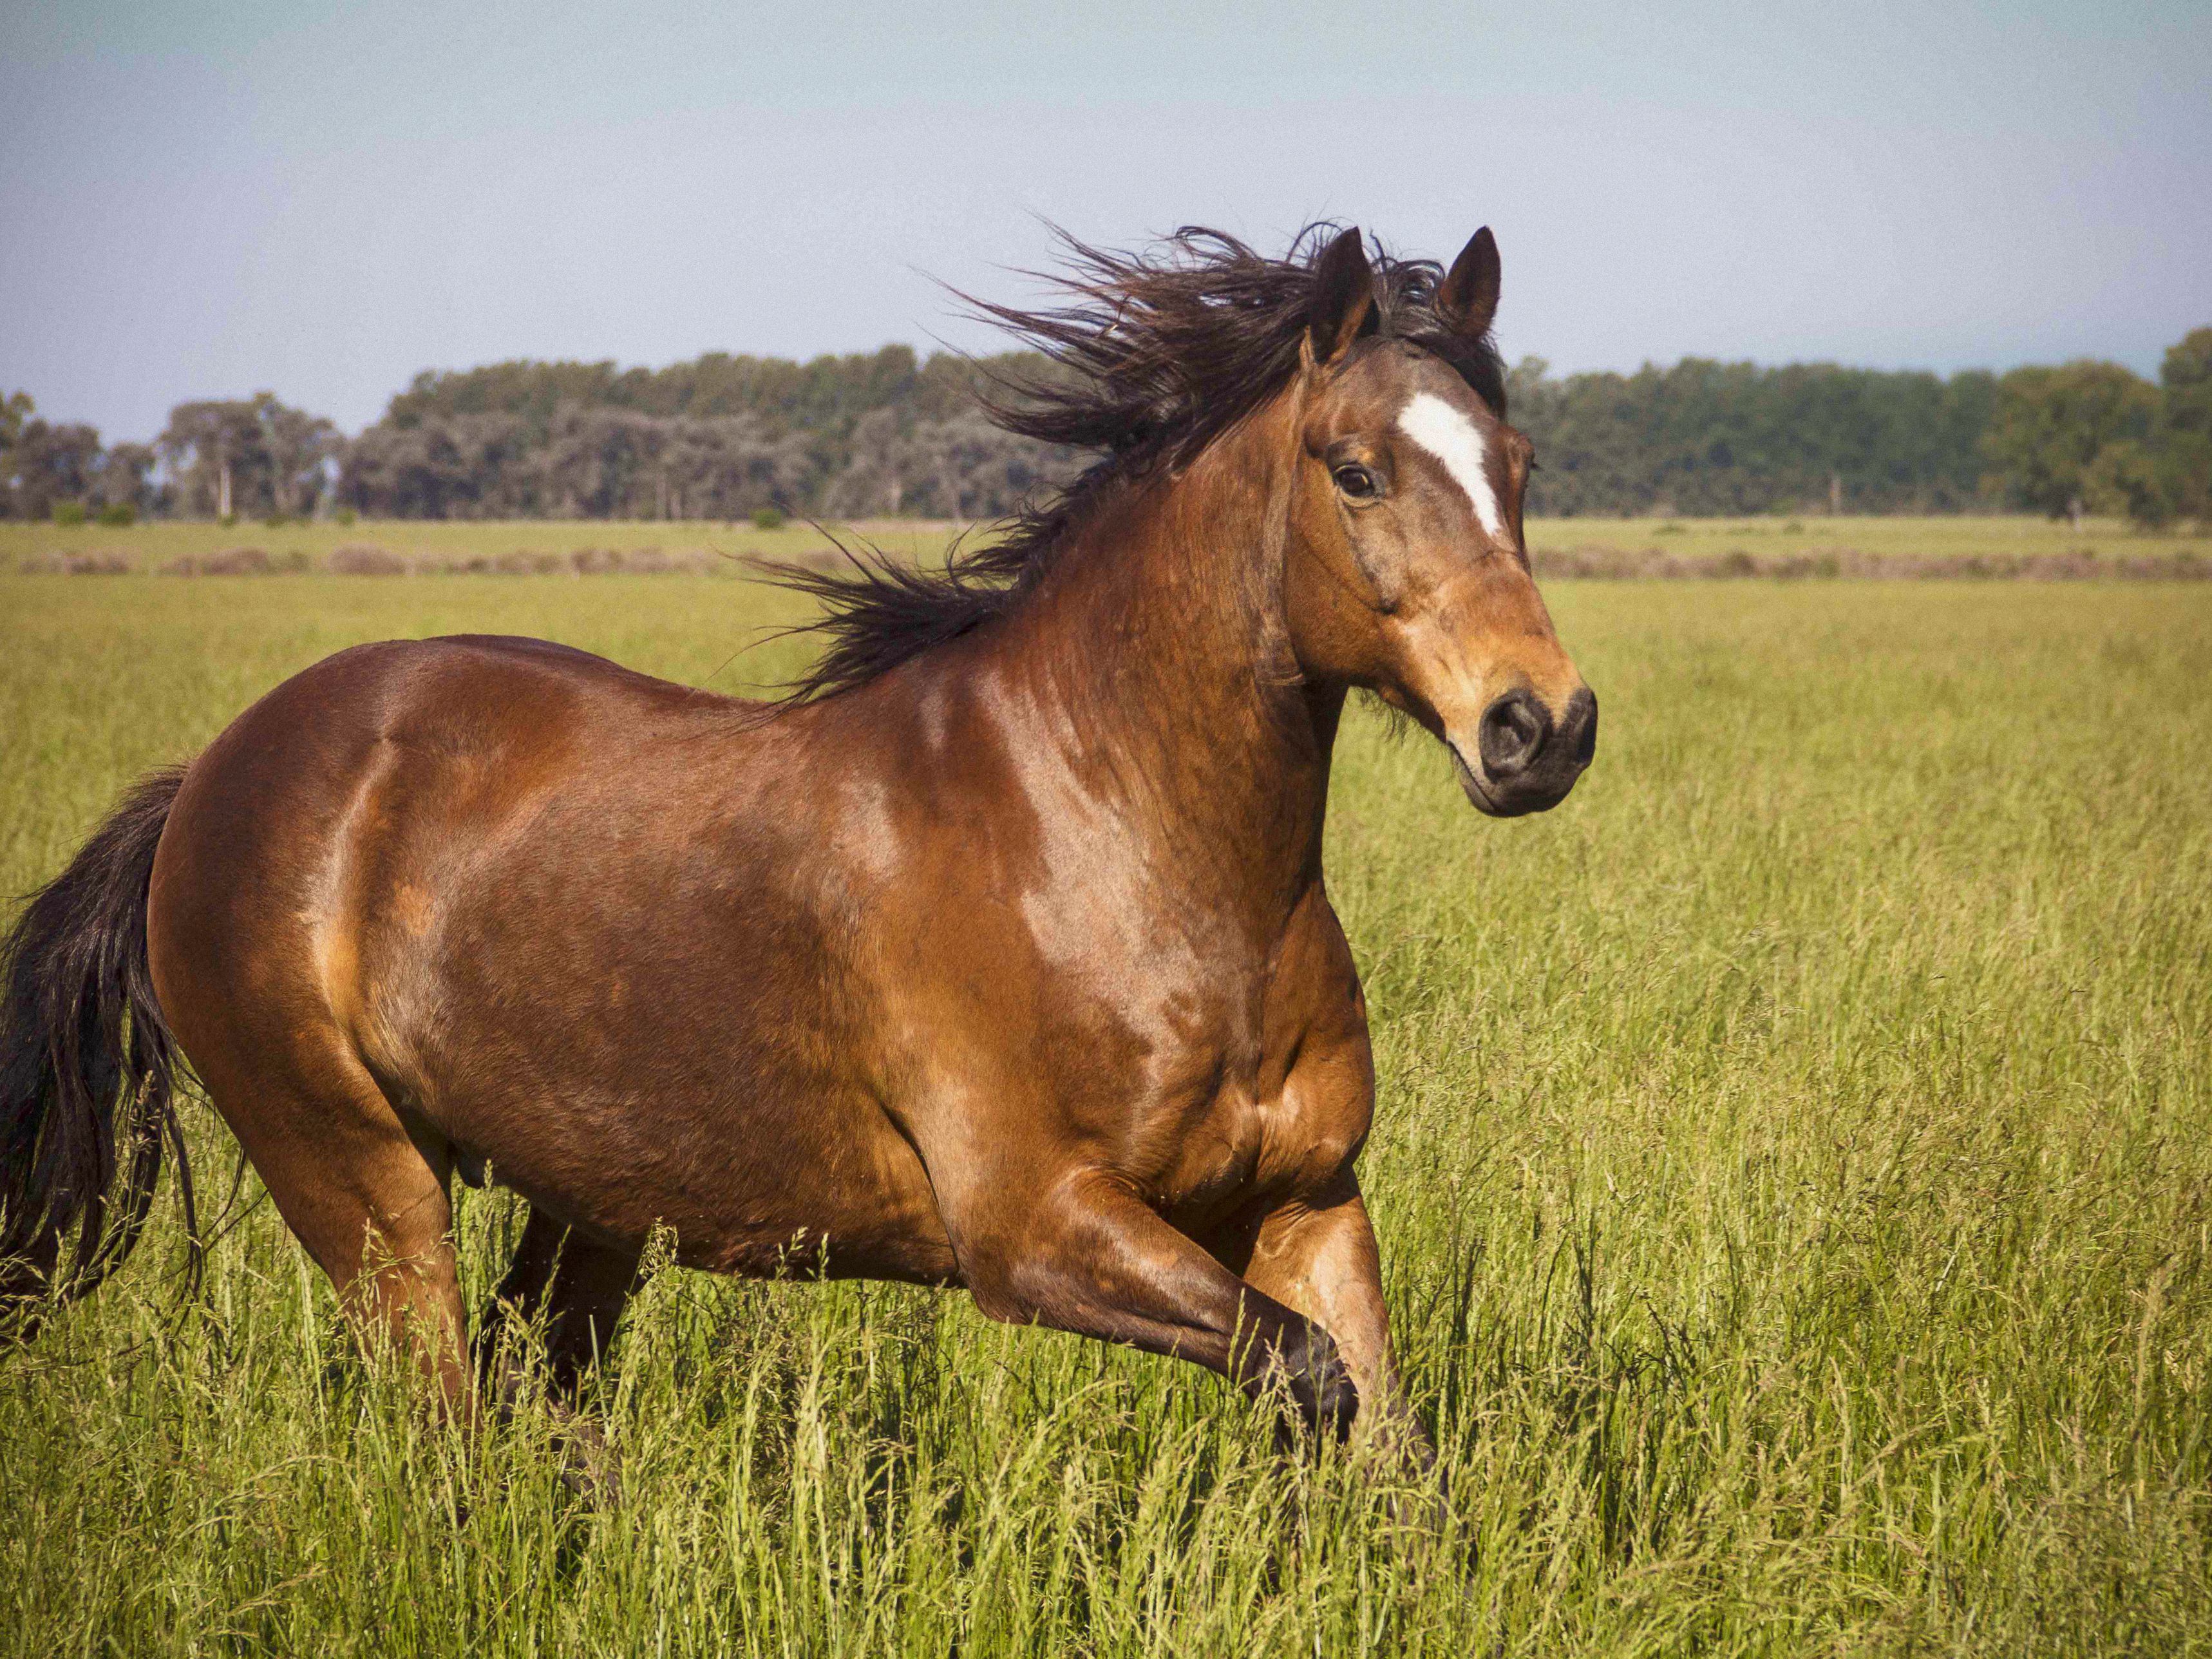 horse galloping in a field of grass